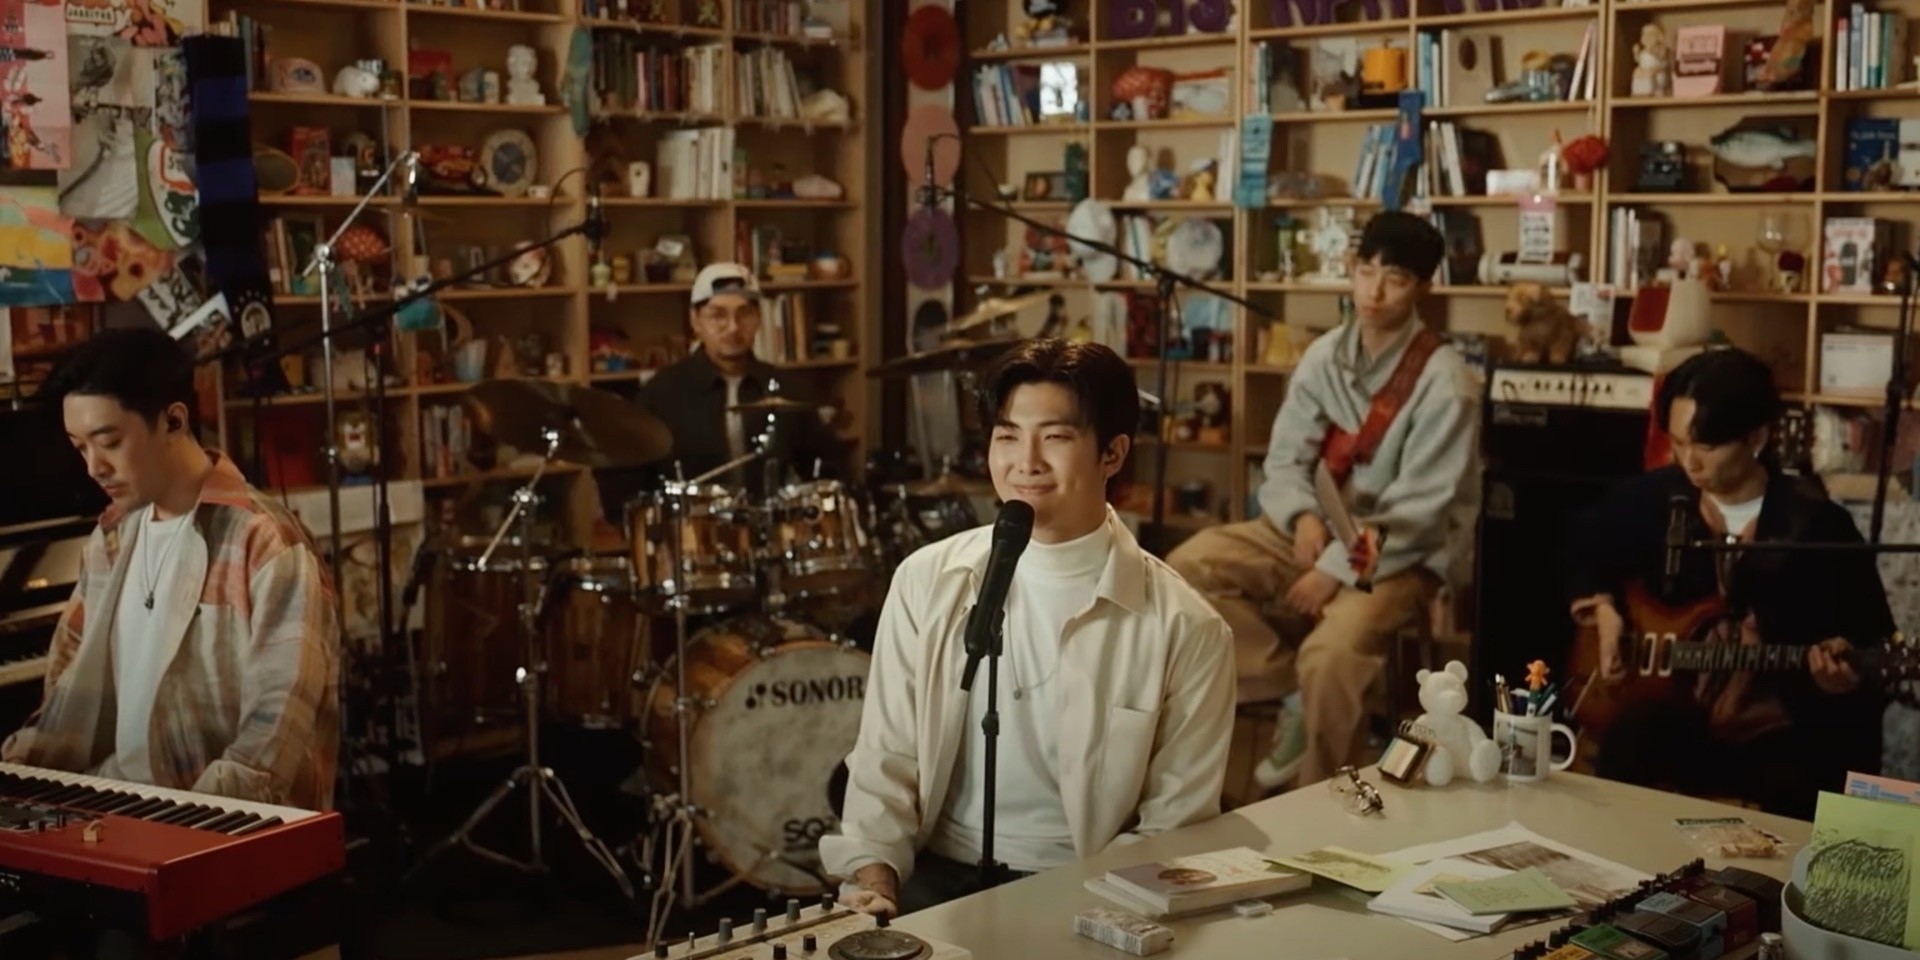 BTS' RM performs 'Seoul', 'Yun', and 'Still Life' on 'NPR Tiny Desk' — watch